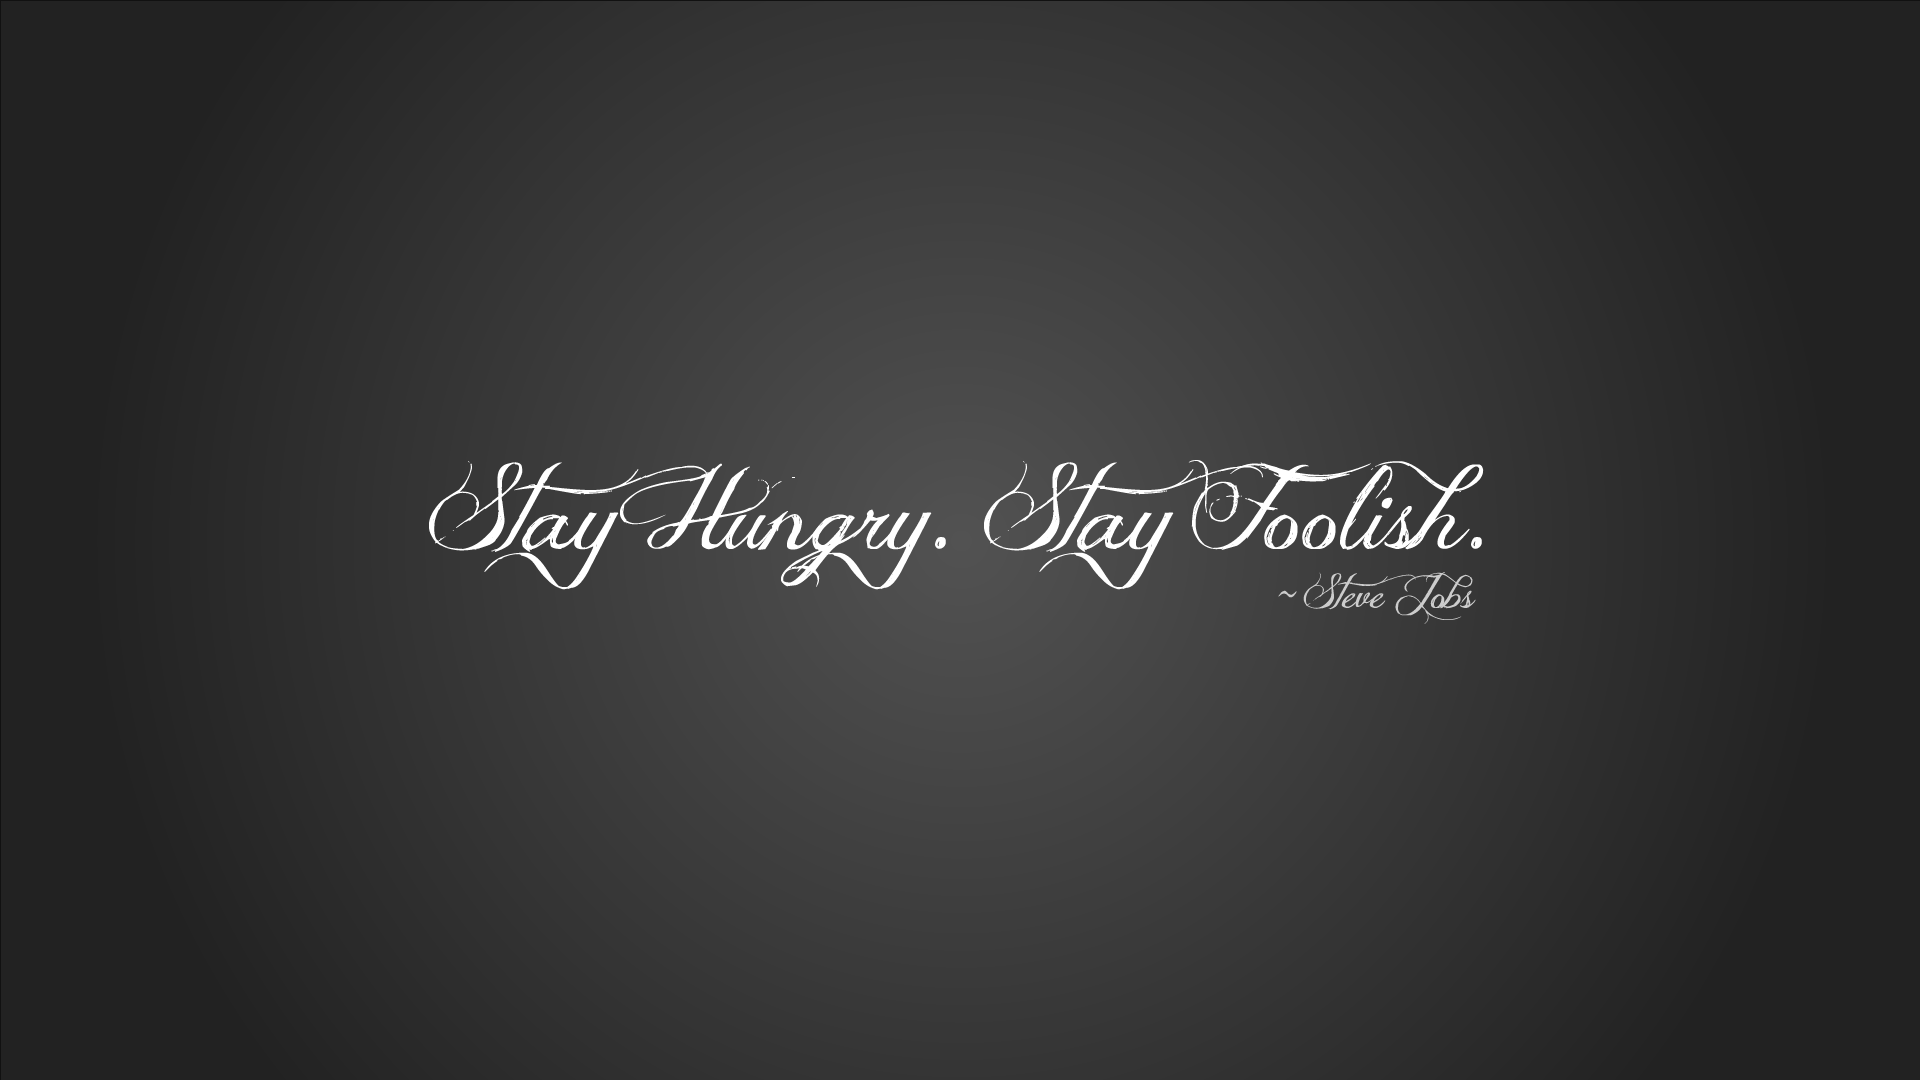 stay hungry stay foolish poster